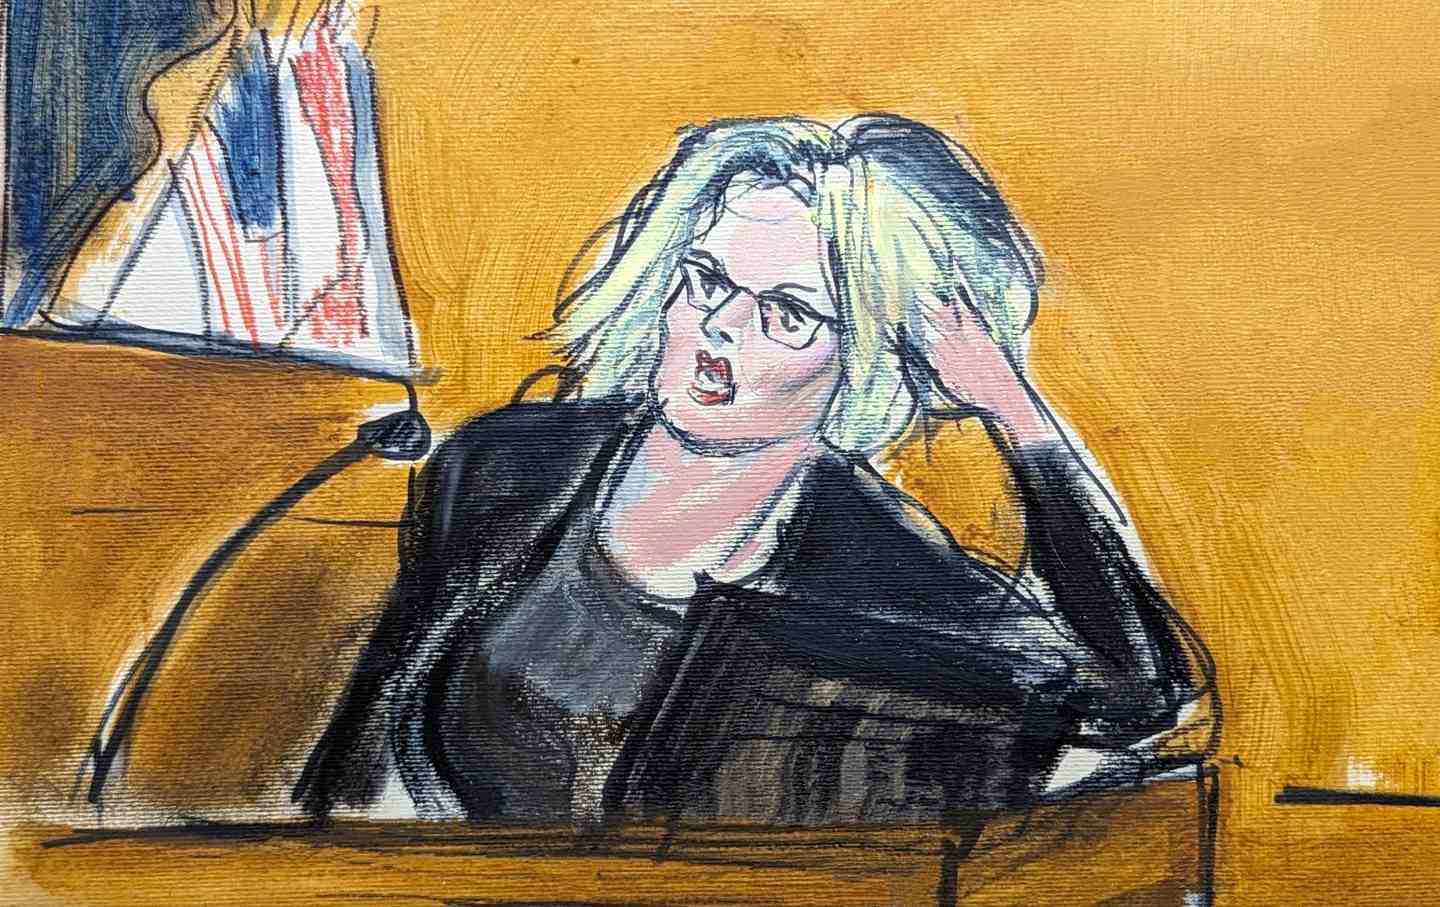 A courtroom sketch of Stormy Daniels on the witness stand, leaning onto her left arm, with the judge in the background.